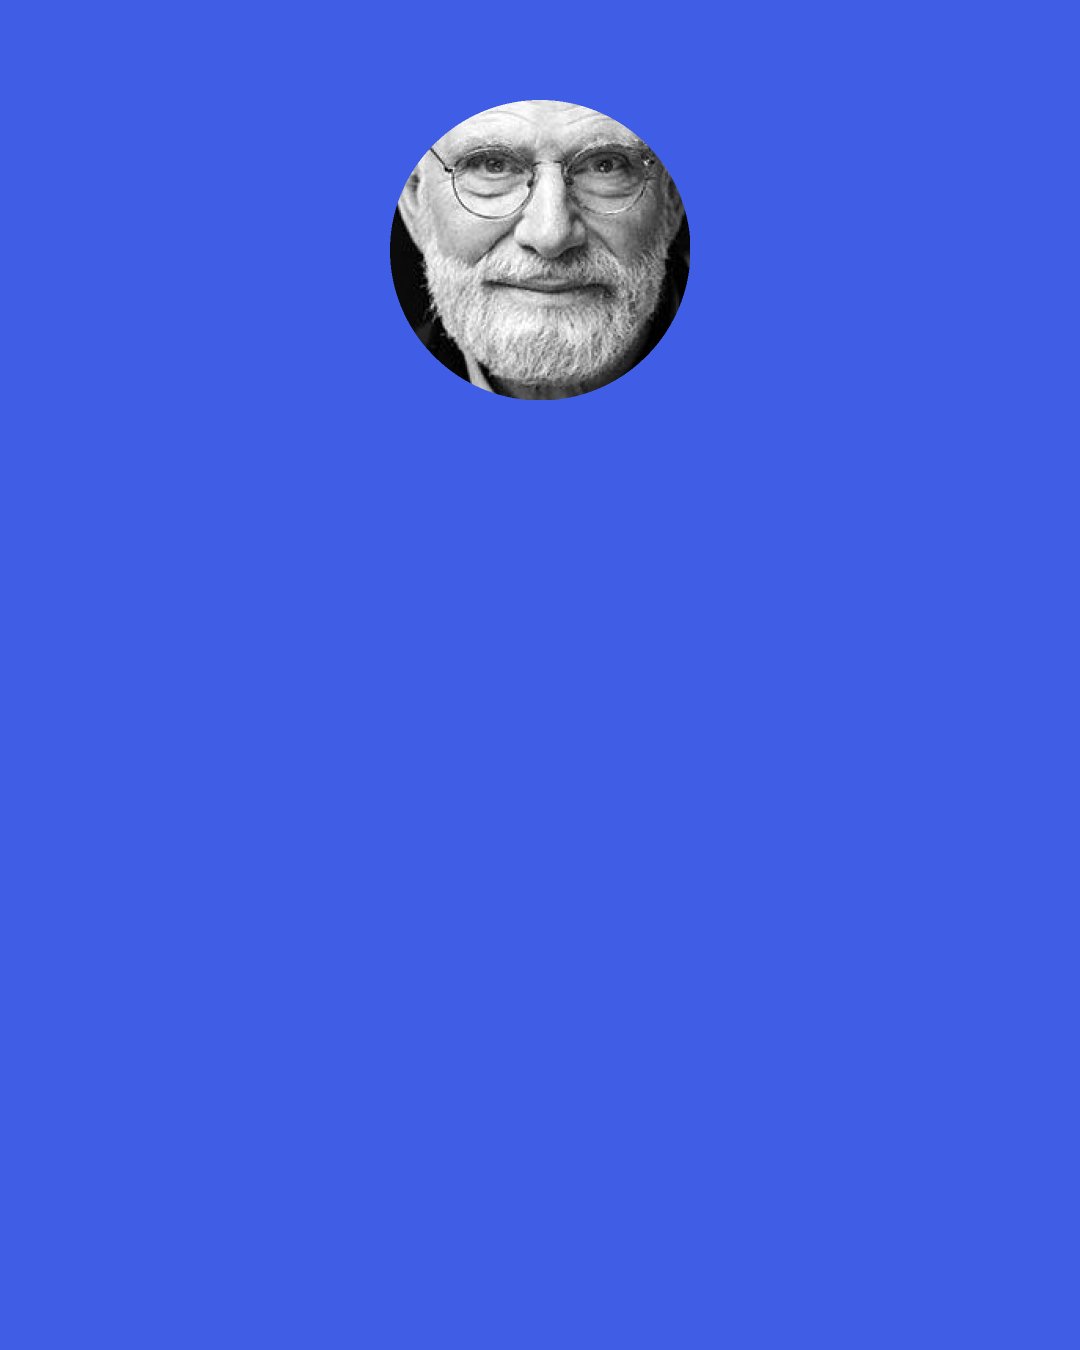 Oliver Sacks: Eccentricity is like having an accent. It's what "other" people have.